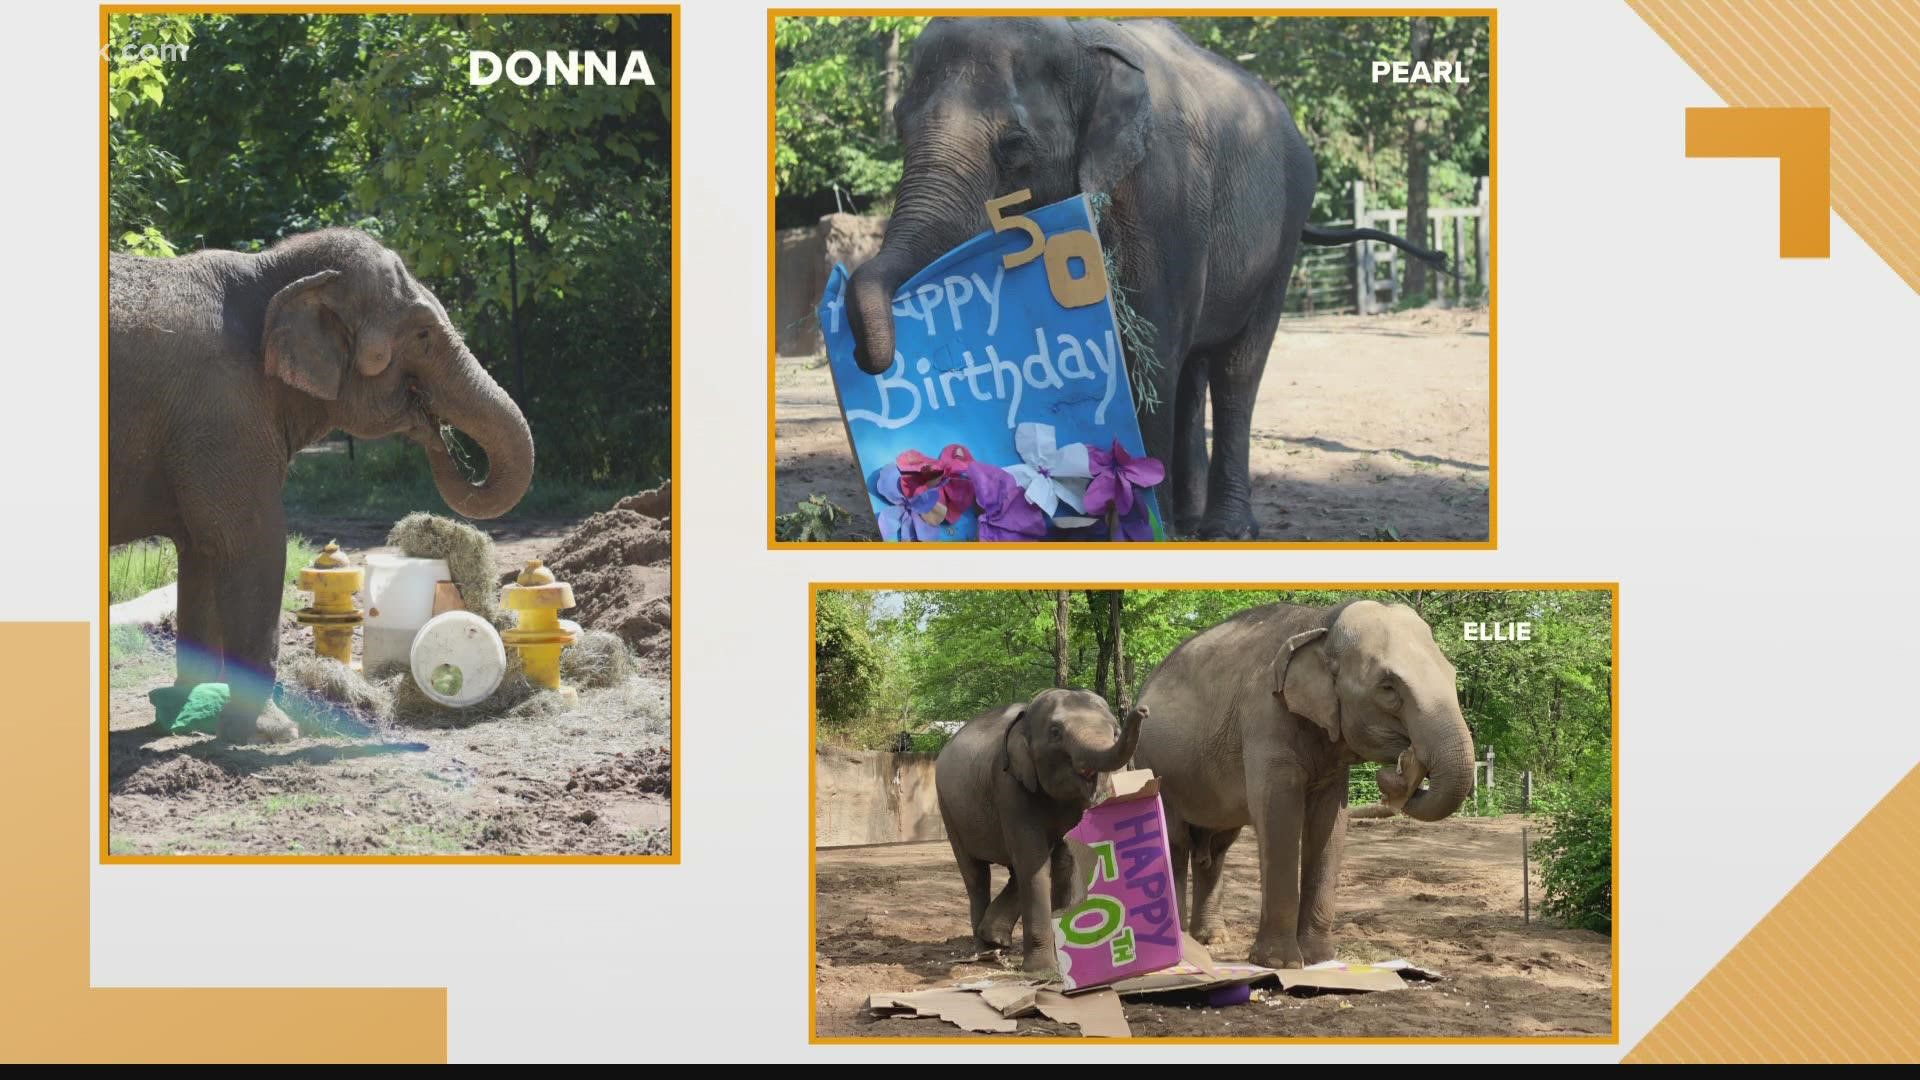 The Saint Louis Zoo celebrated a major milestone for three of its elderly Asian elephants this year. Pearl, Donna and Ellie all turned 50 years old.